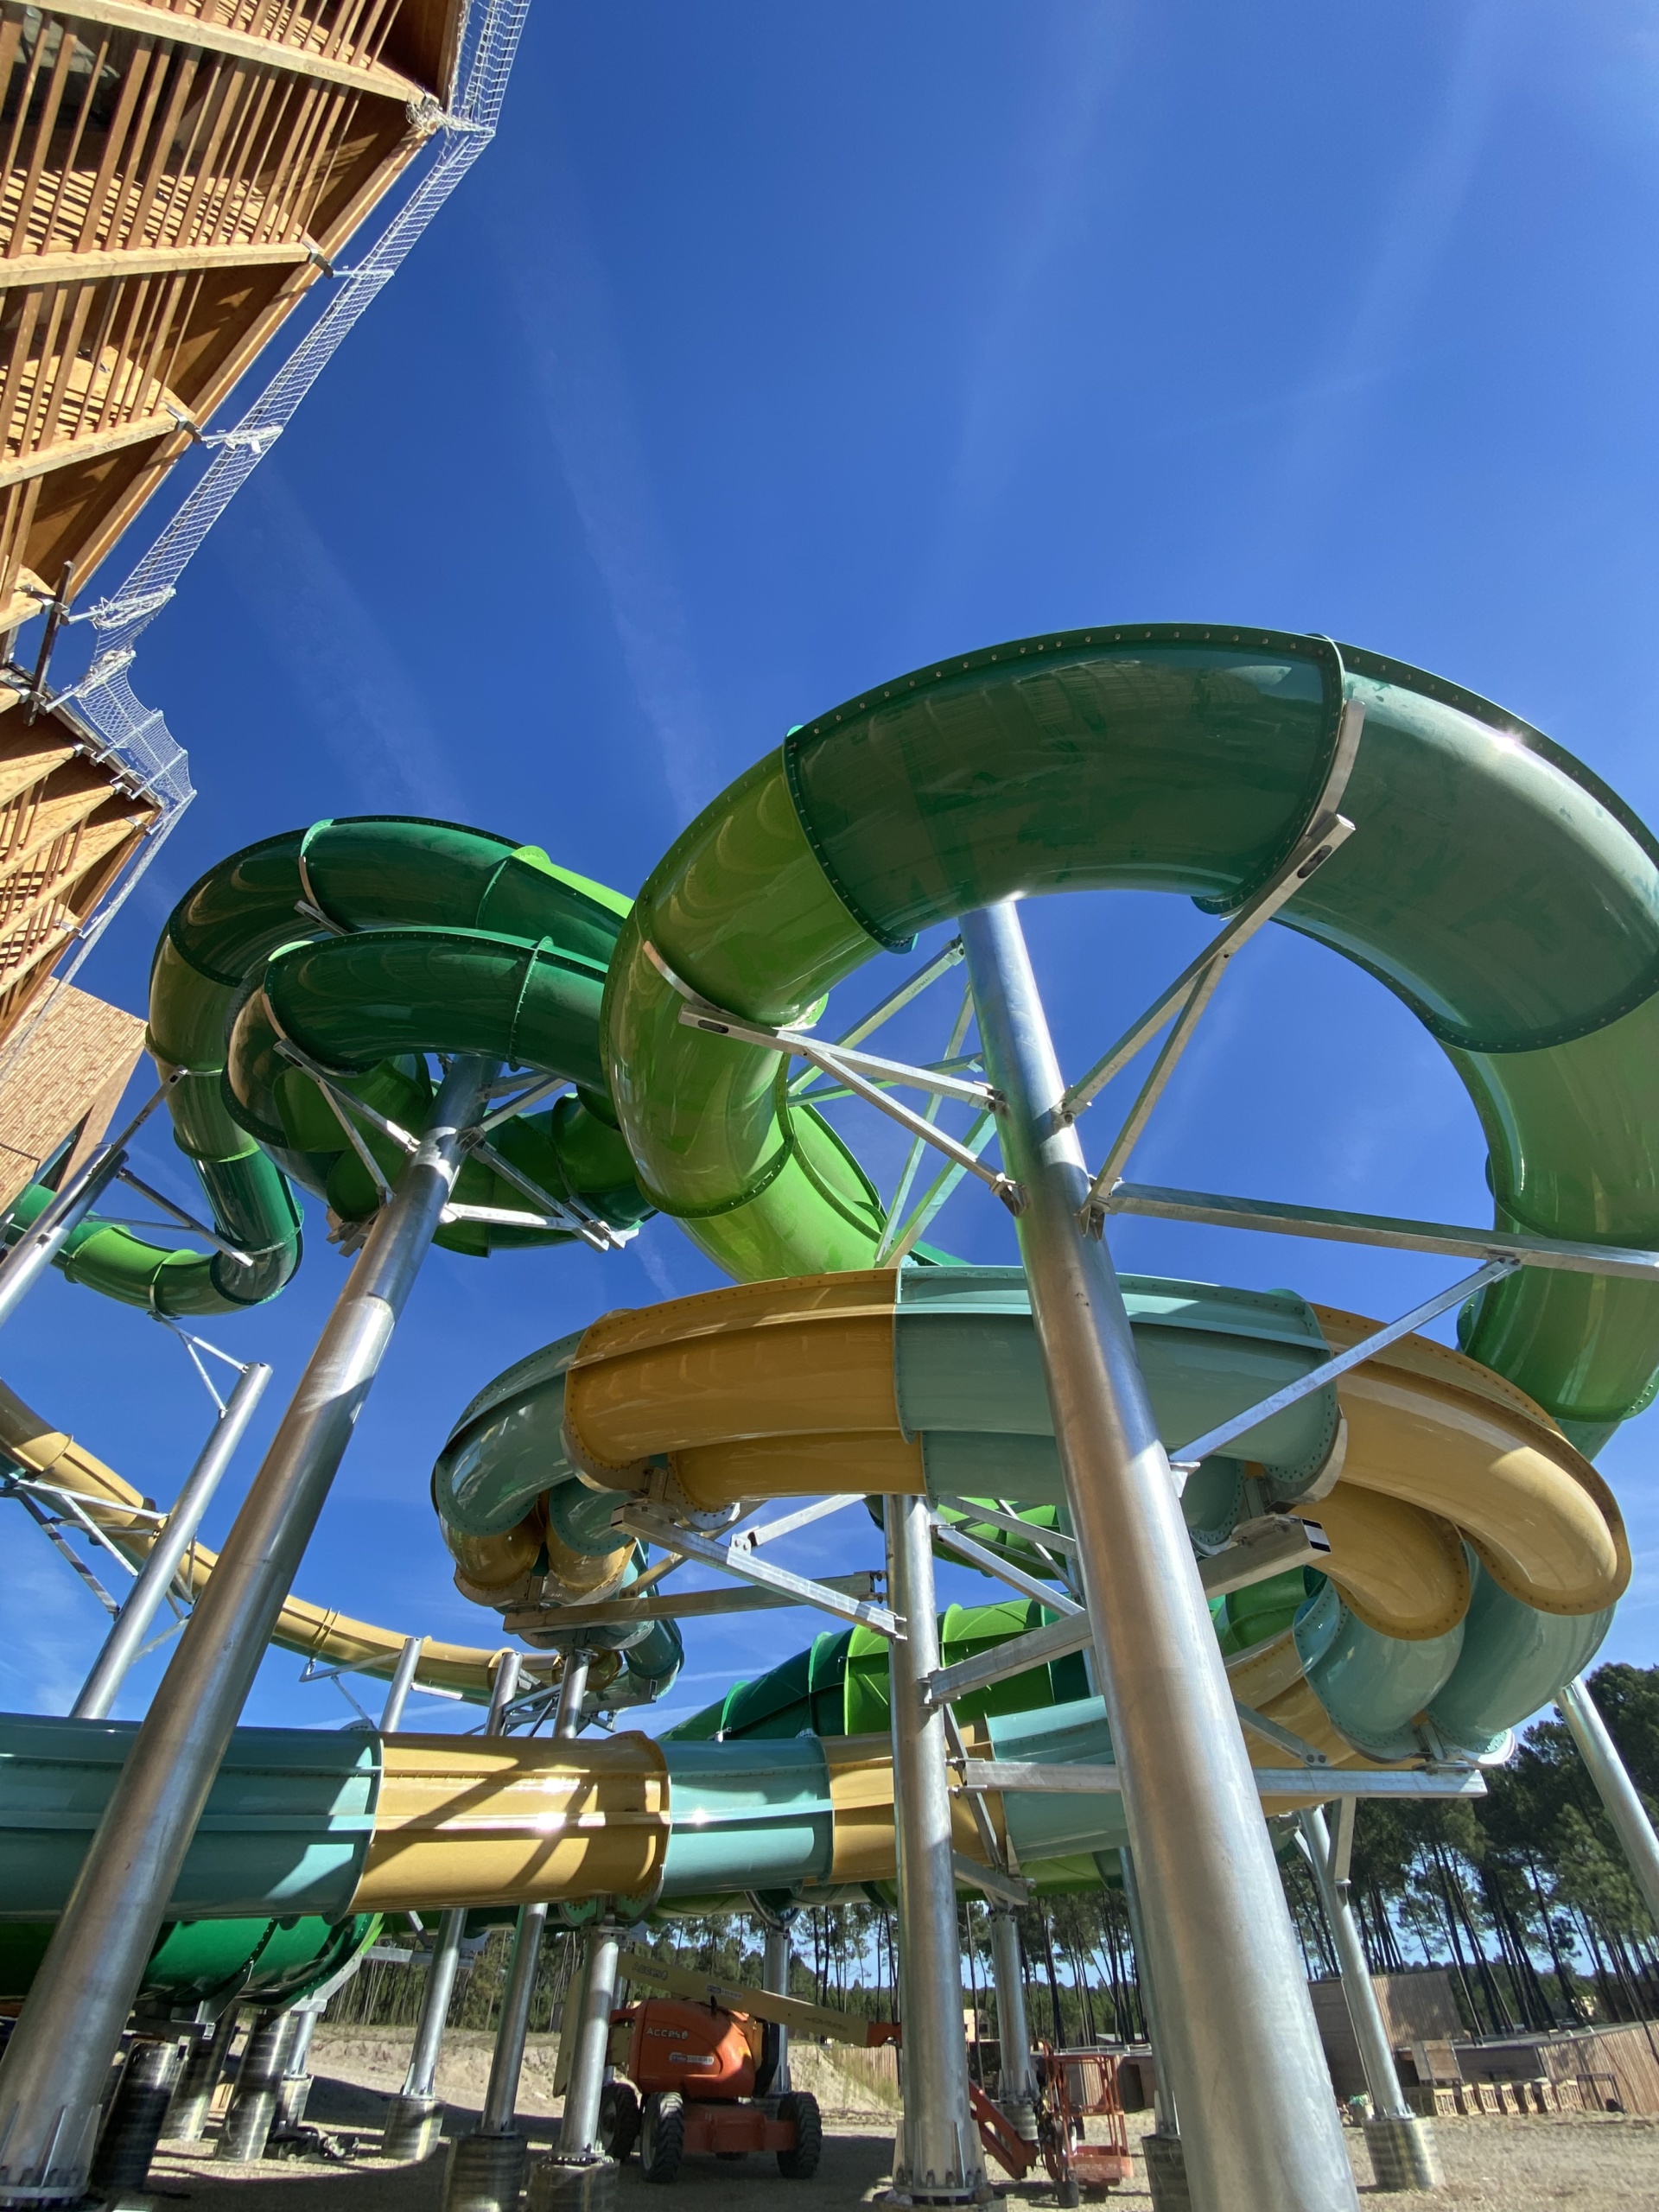 Light blue and green water slides